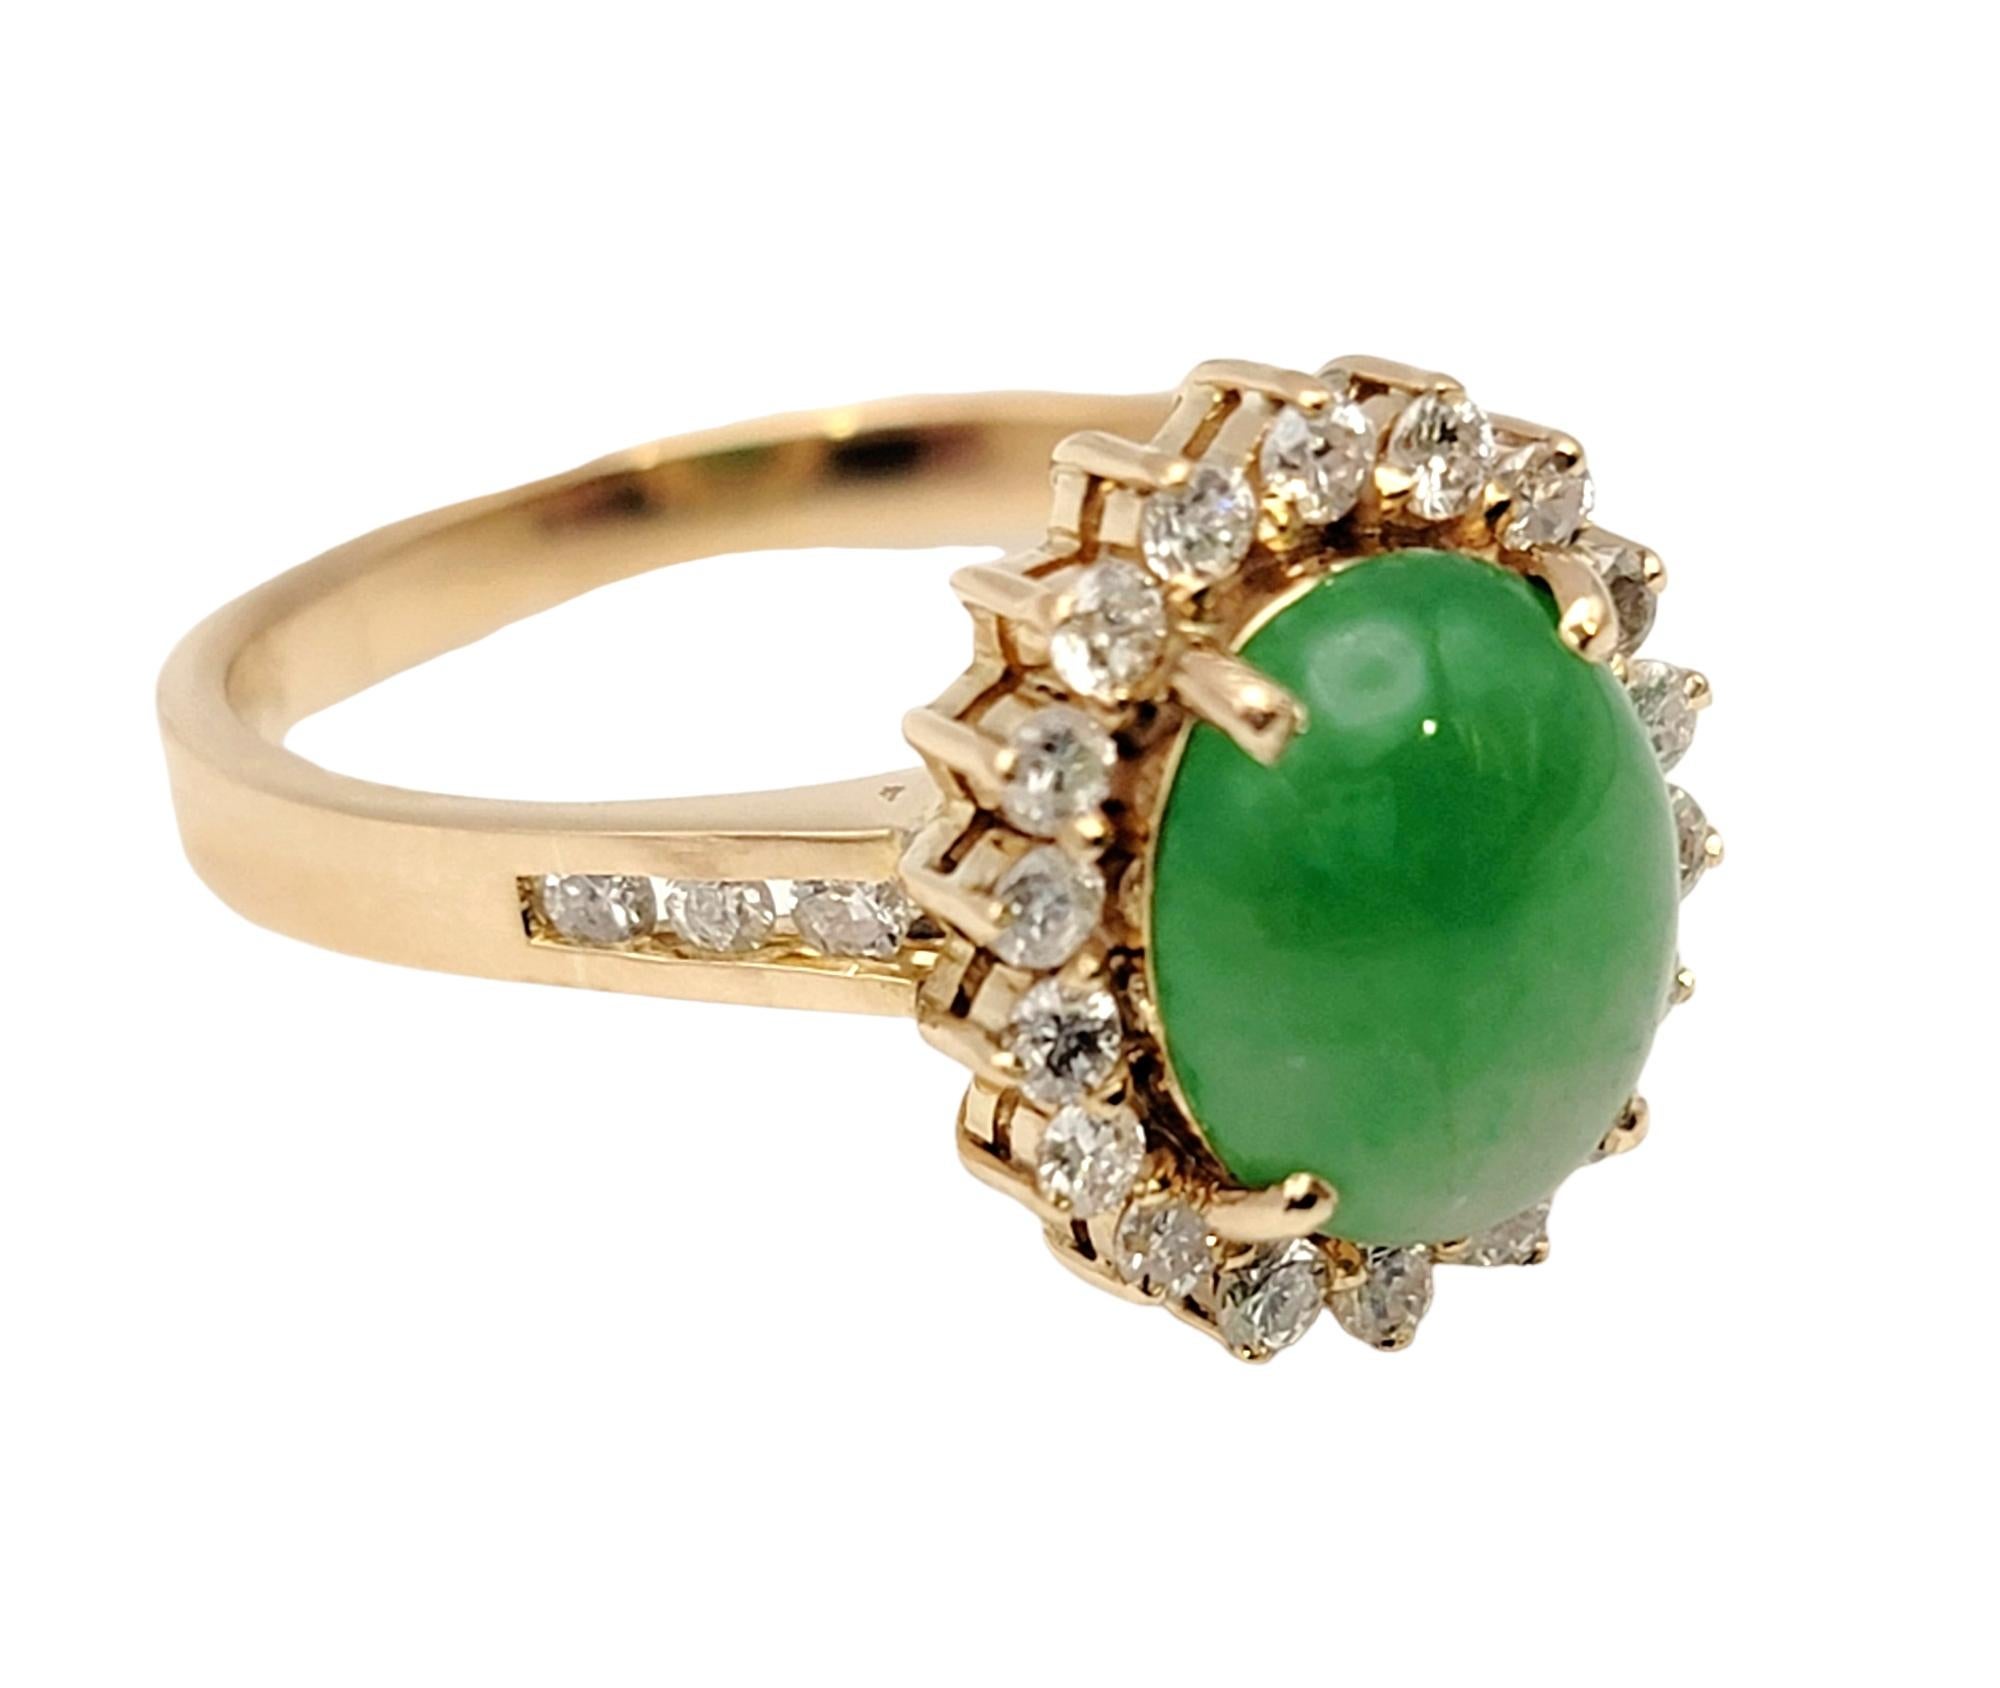 Natural Oval Cabochon Jade and Diamond Halo Ring in 14 Karat Yellow Gold In Good Condition For Sale In Scottsdale, AZ